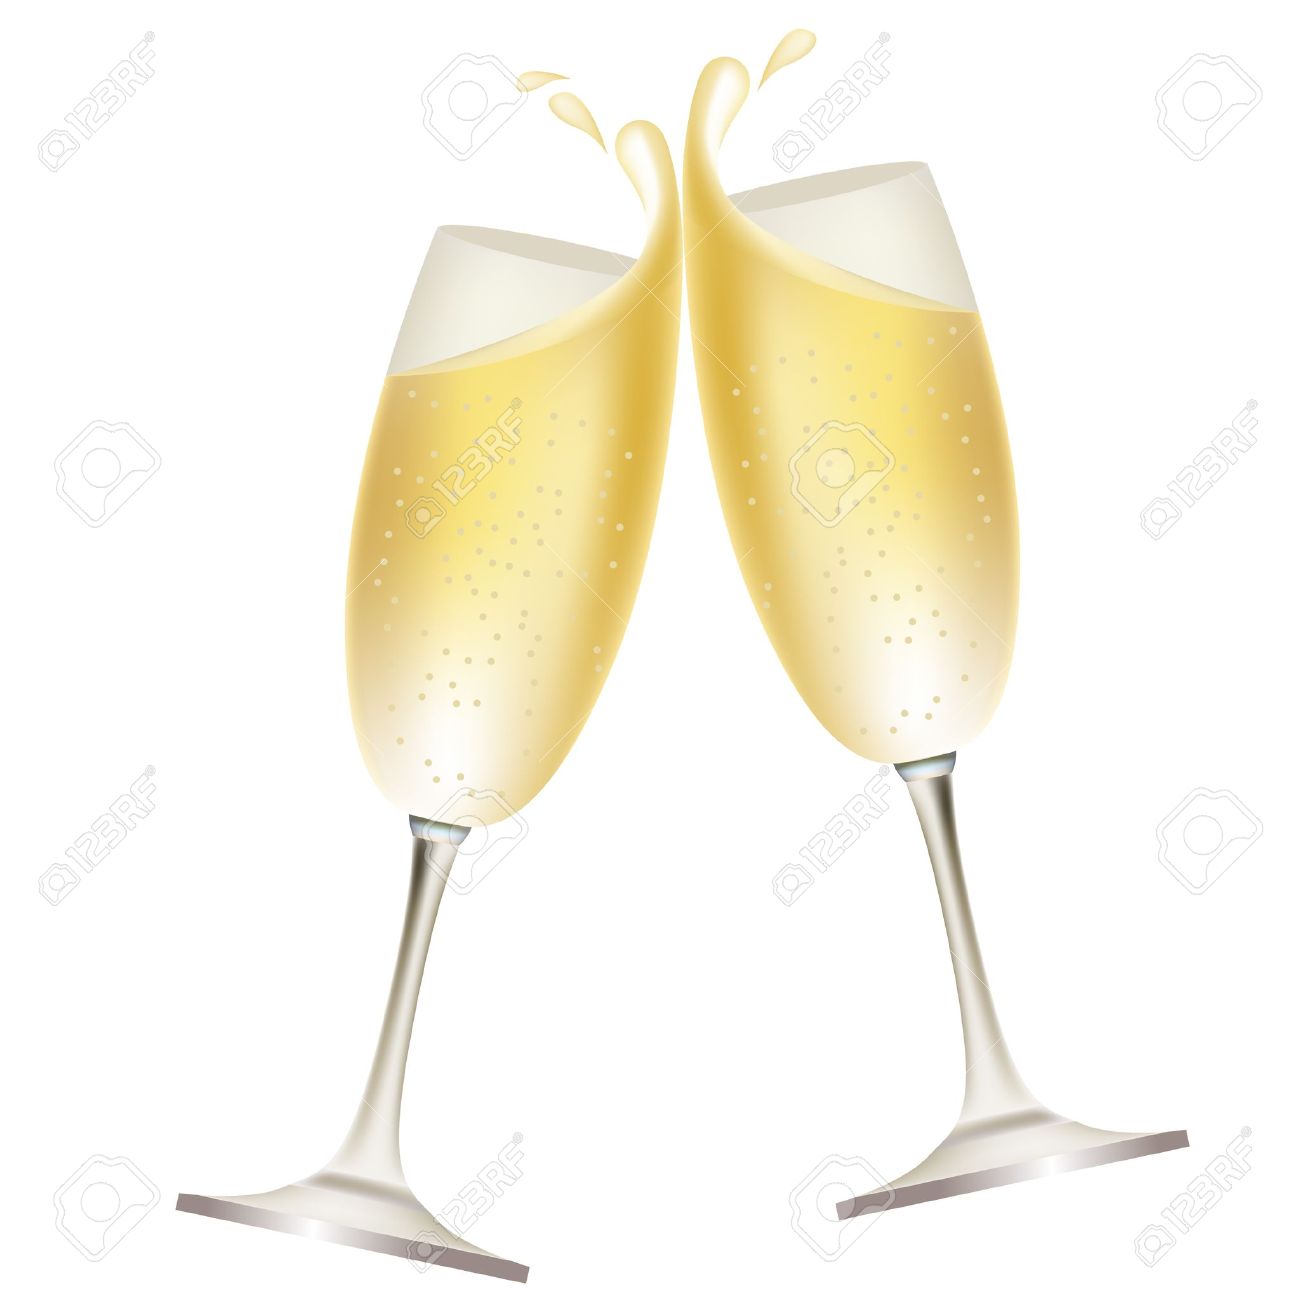 Toast clipart champagne glass pencil and in color toast jpg